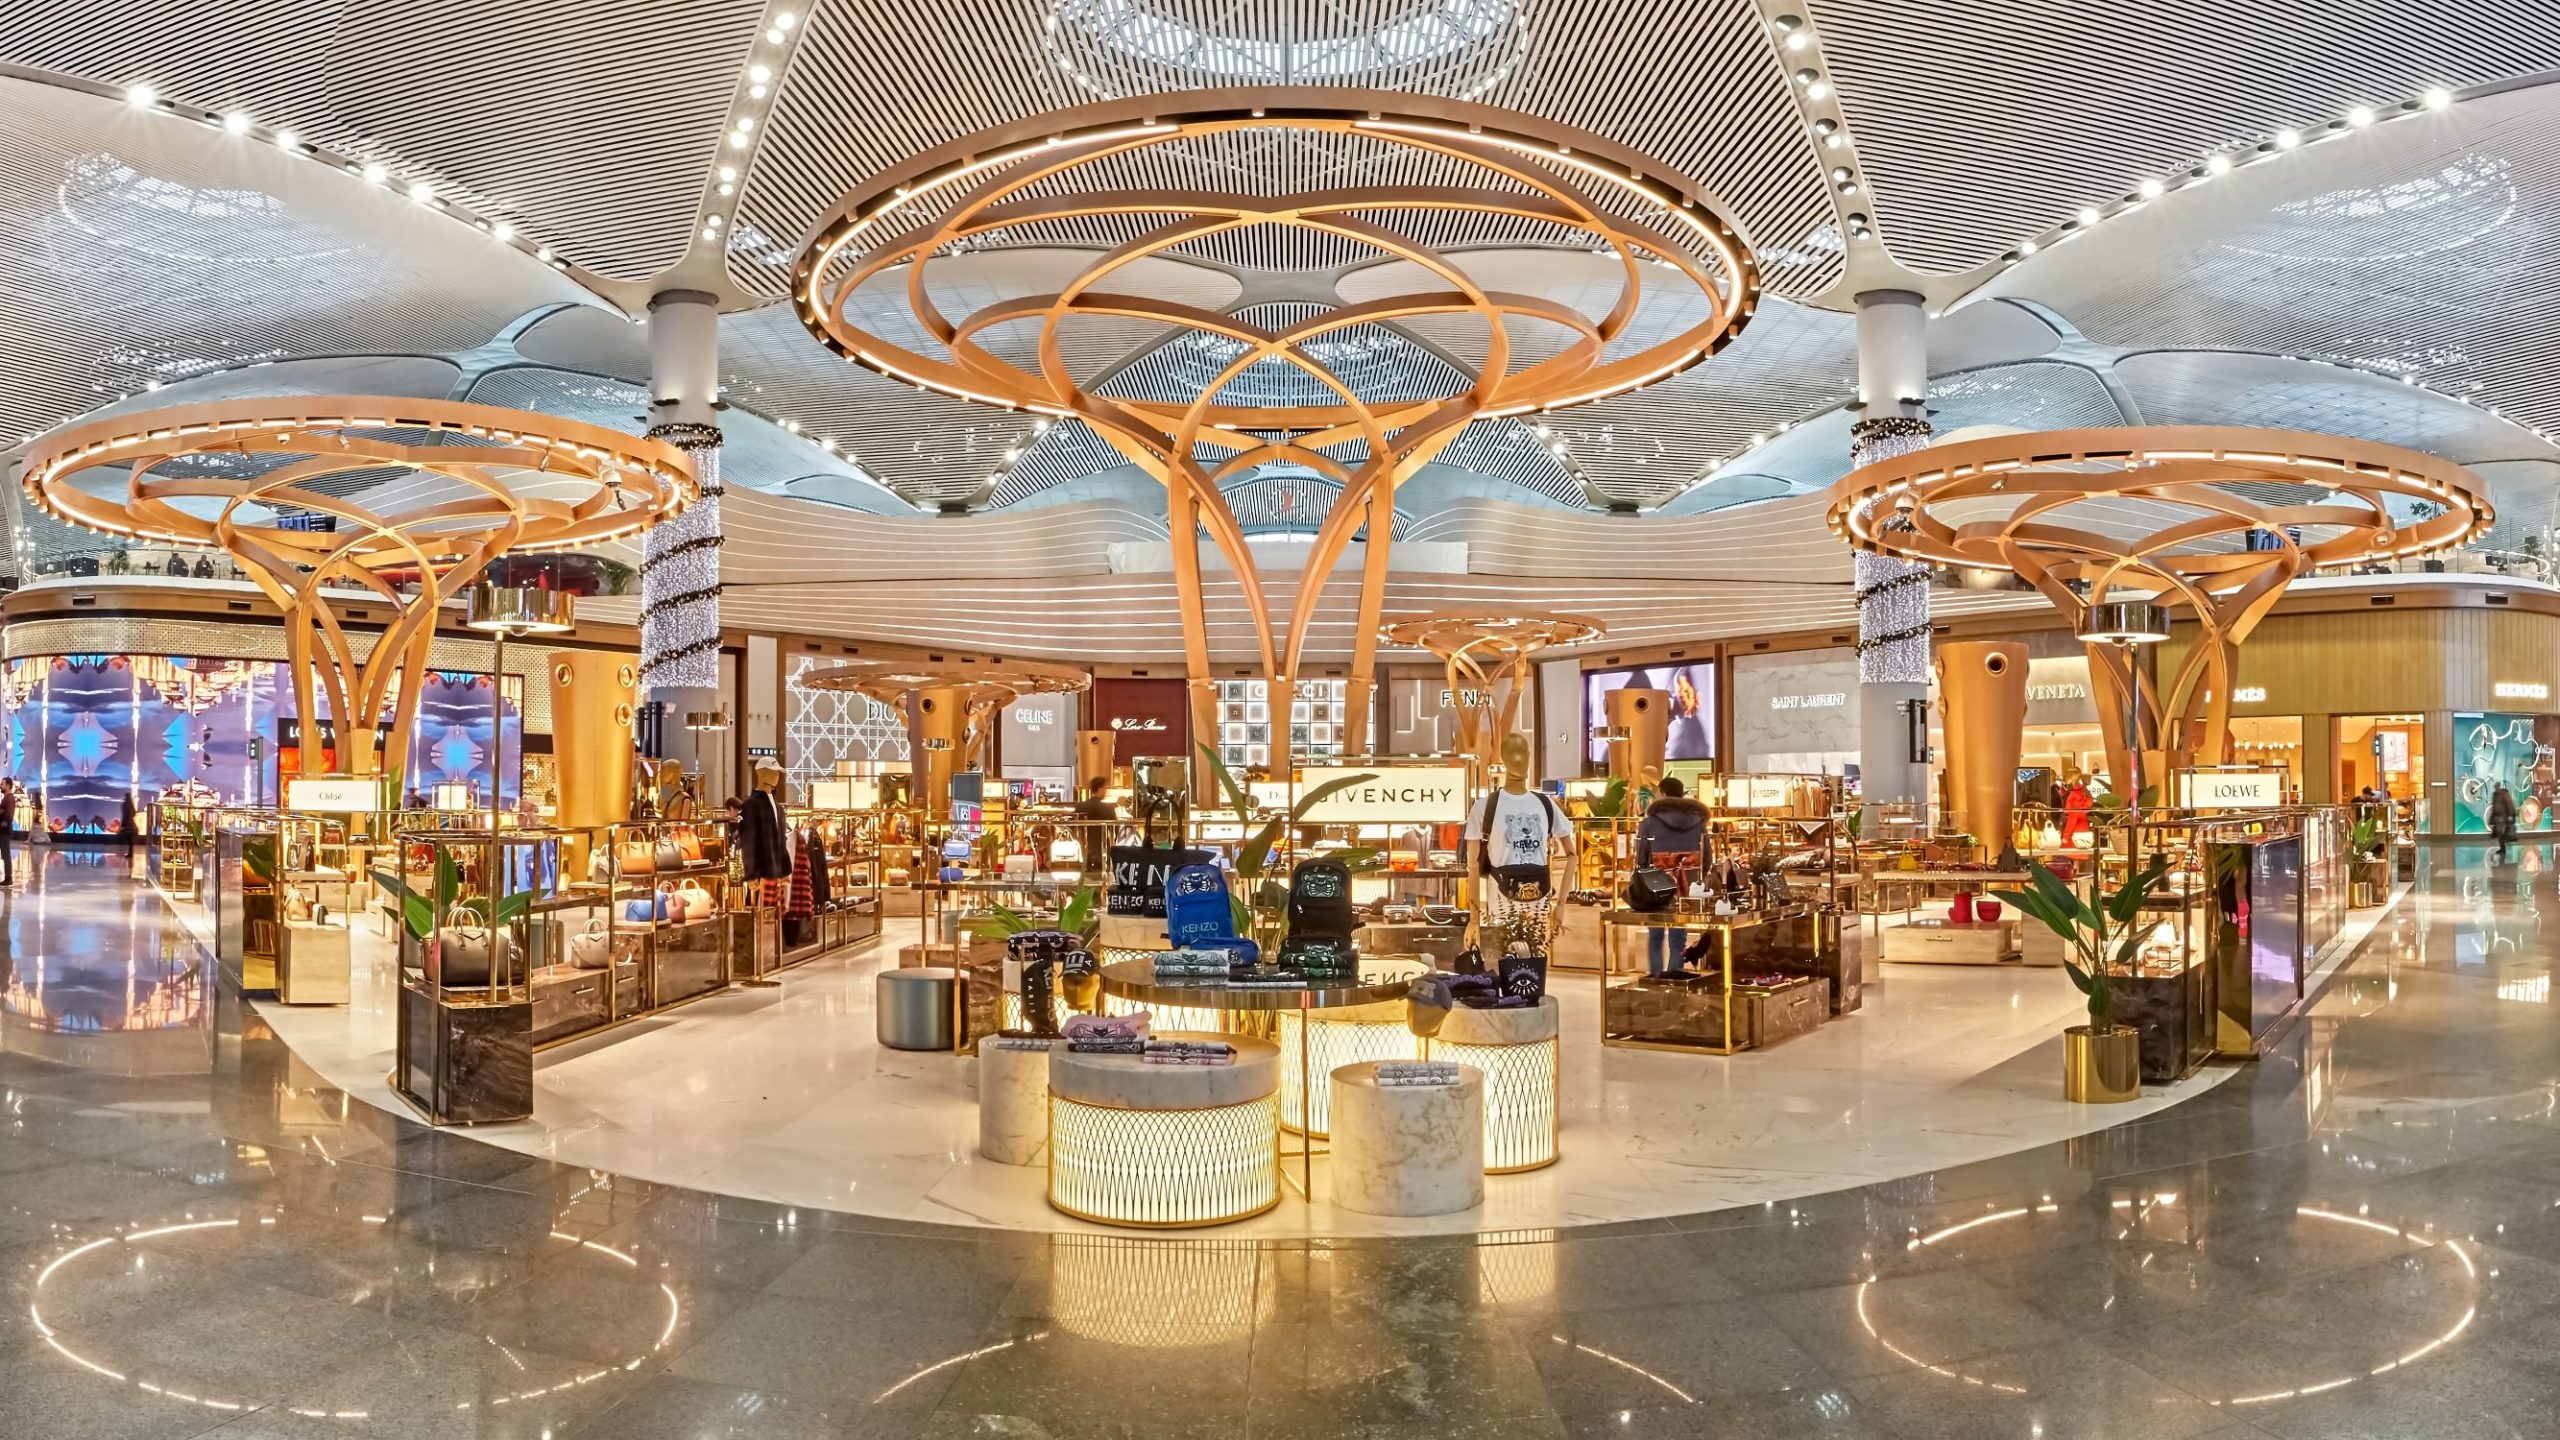 On Location: ATÜ hails 'benchmark' Luxury Square at official at Istanbul Airport - ATÜ Duty Free